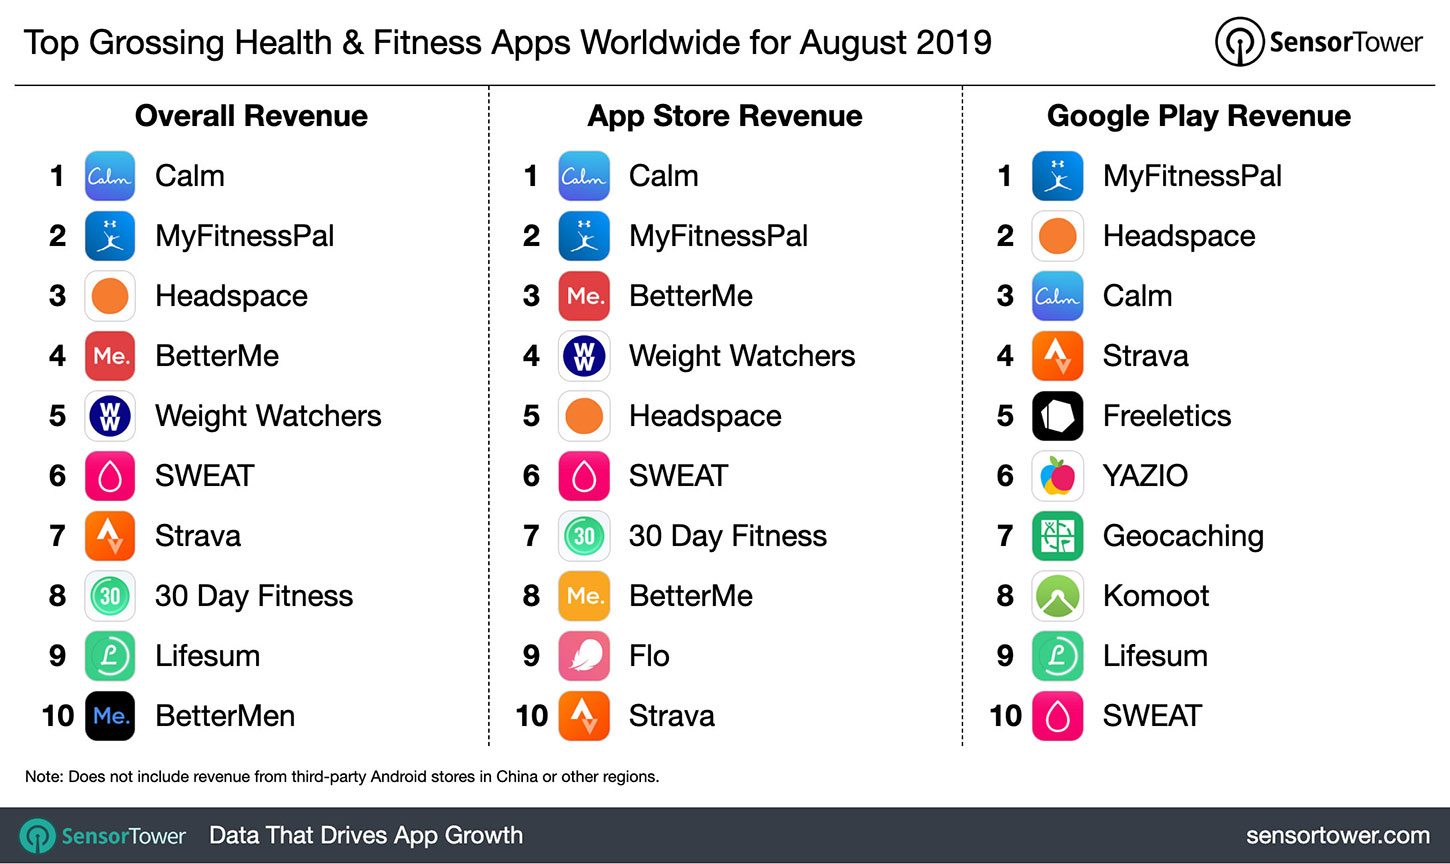 top-grossing-health-and-fitness-apps-worldwide-august-2019.jpg